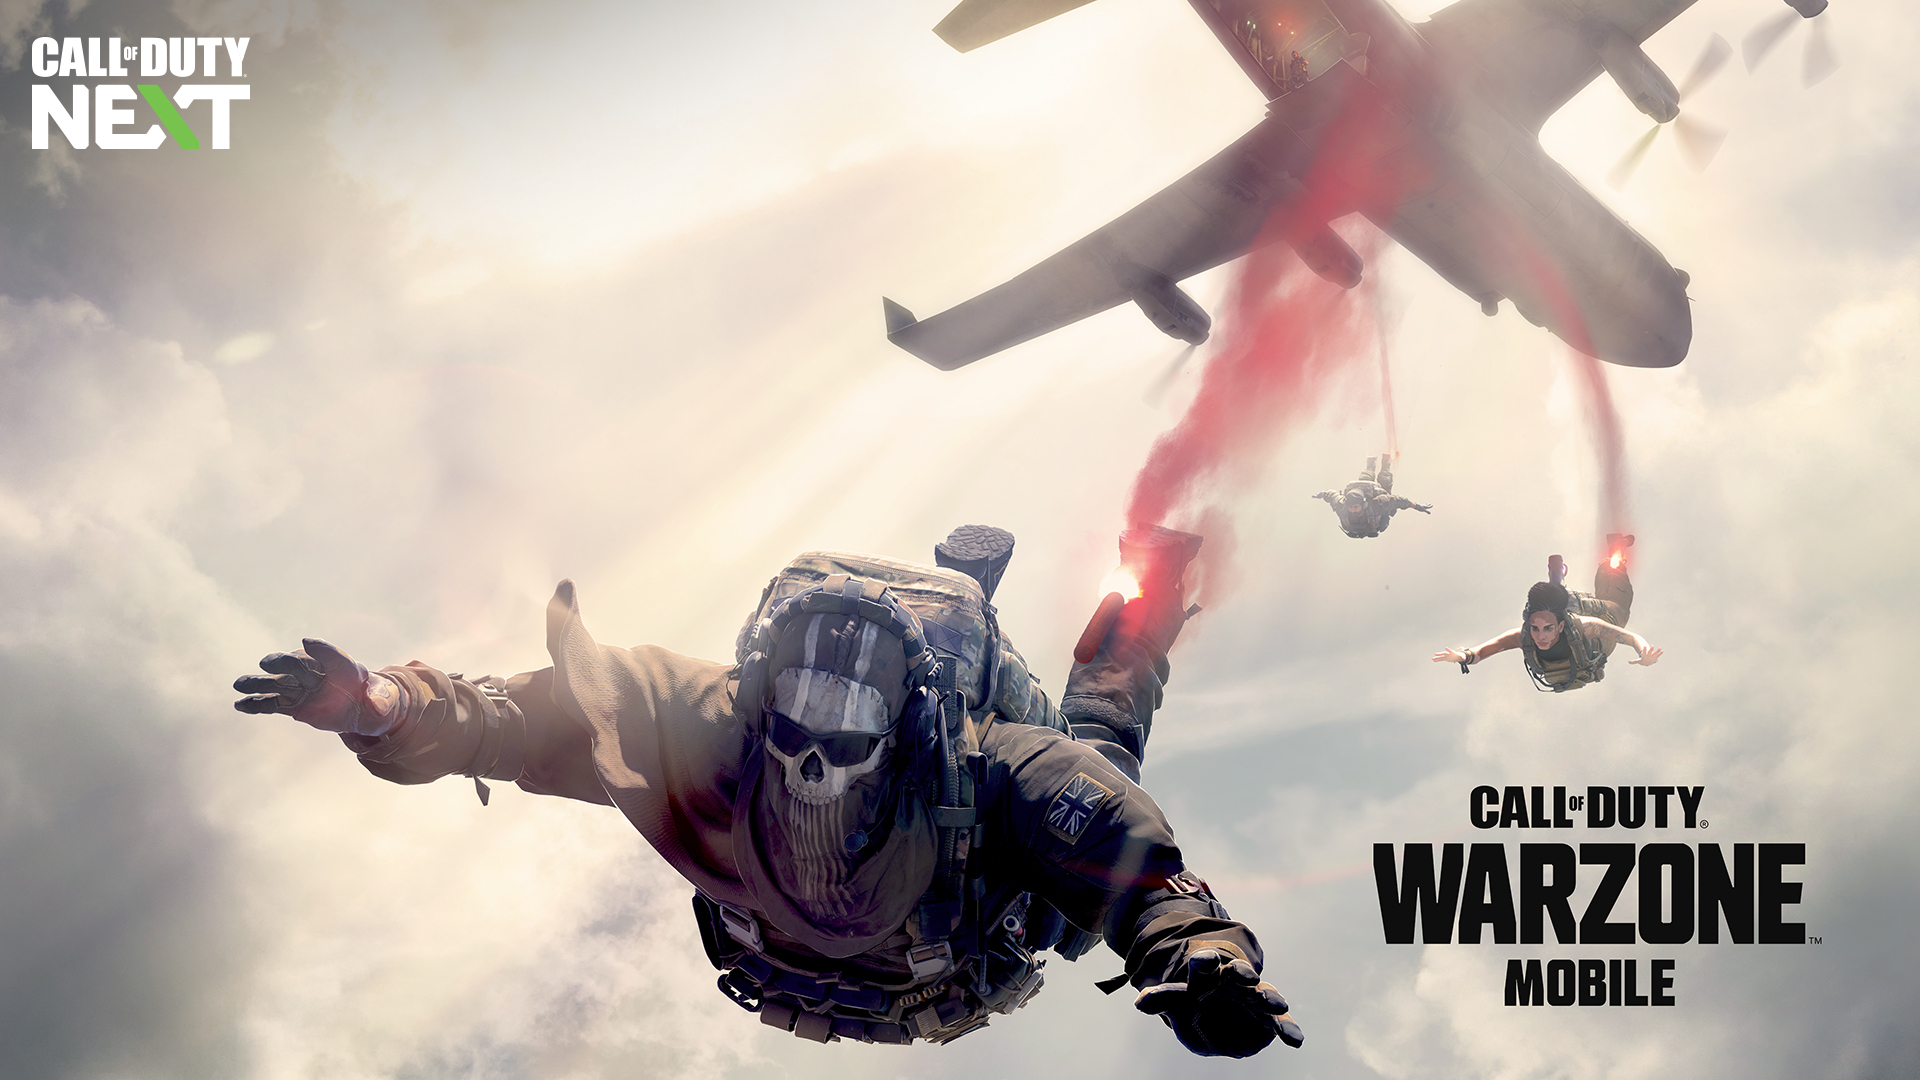 Announcing Call of Duty®: Warzone™ Mobile, redefining Battle Royale for gamers on the go